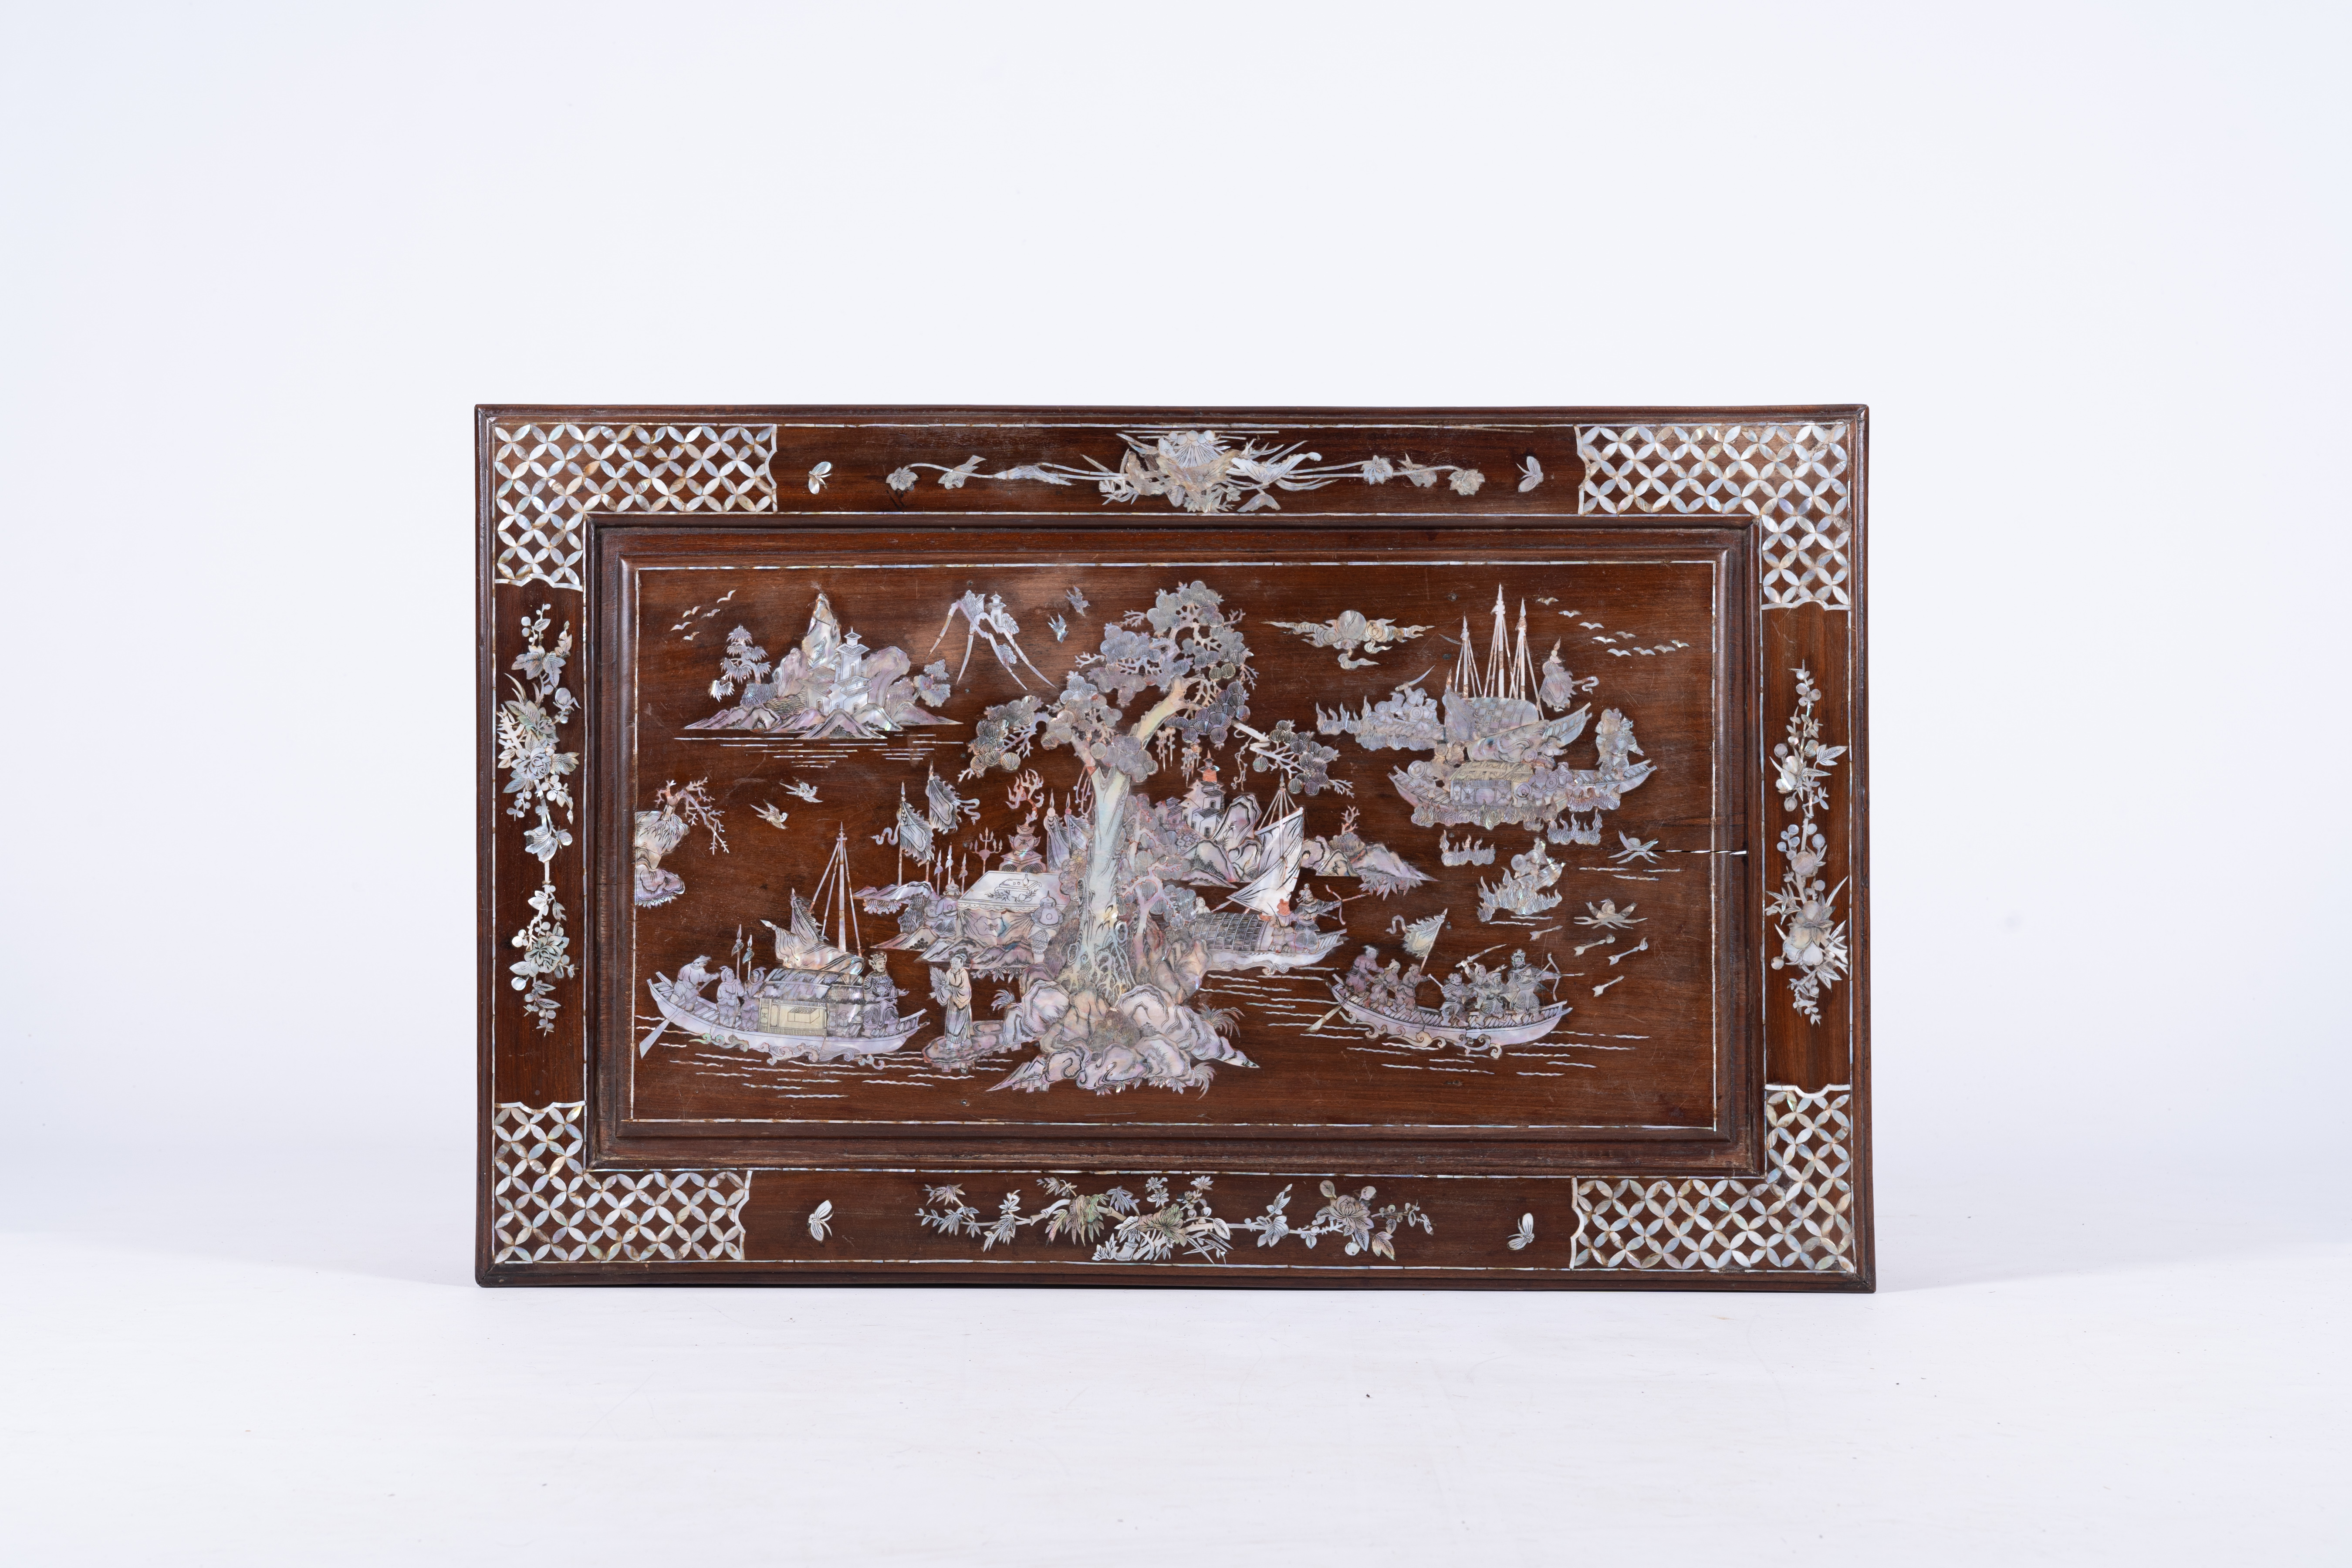 Two Chinese or Vietnamese wood side tables inlaid with mother-of-pearl with animated landscapes, 20t - Image 9 of 15